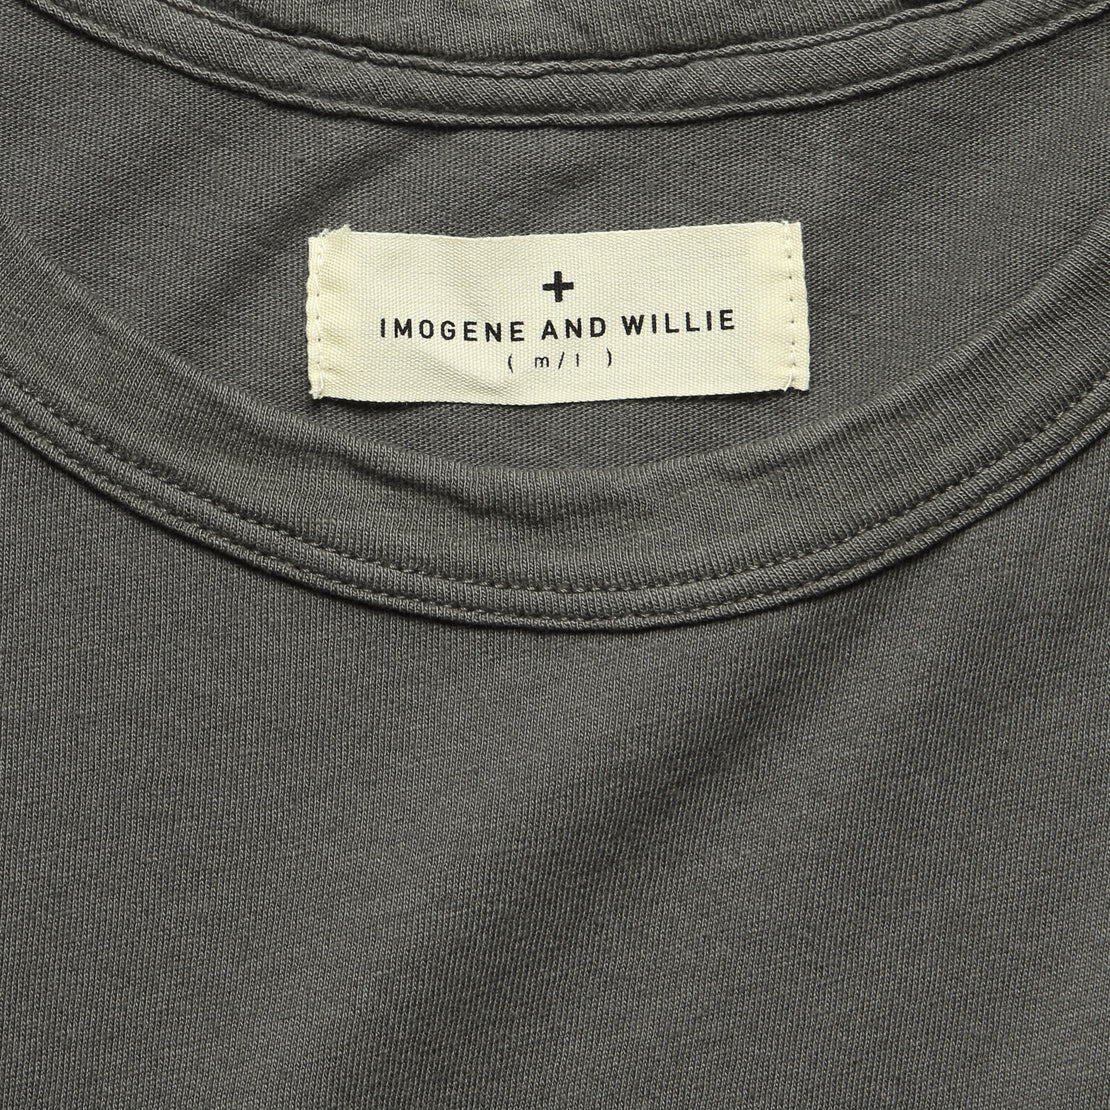 Drop Tee -  Faded Grey - Imogene + Willie - STAG Provisions - W - Tops - S/S Tee